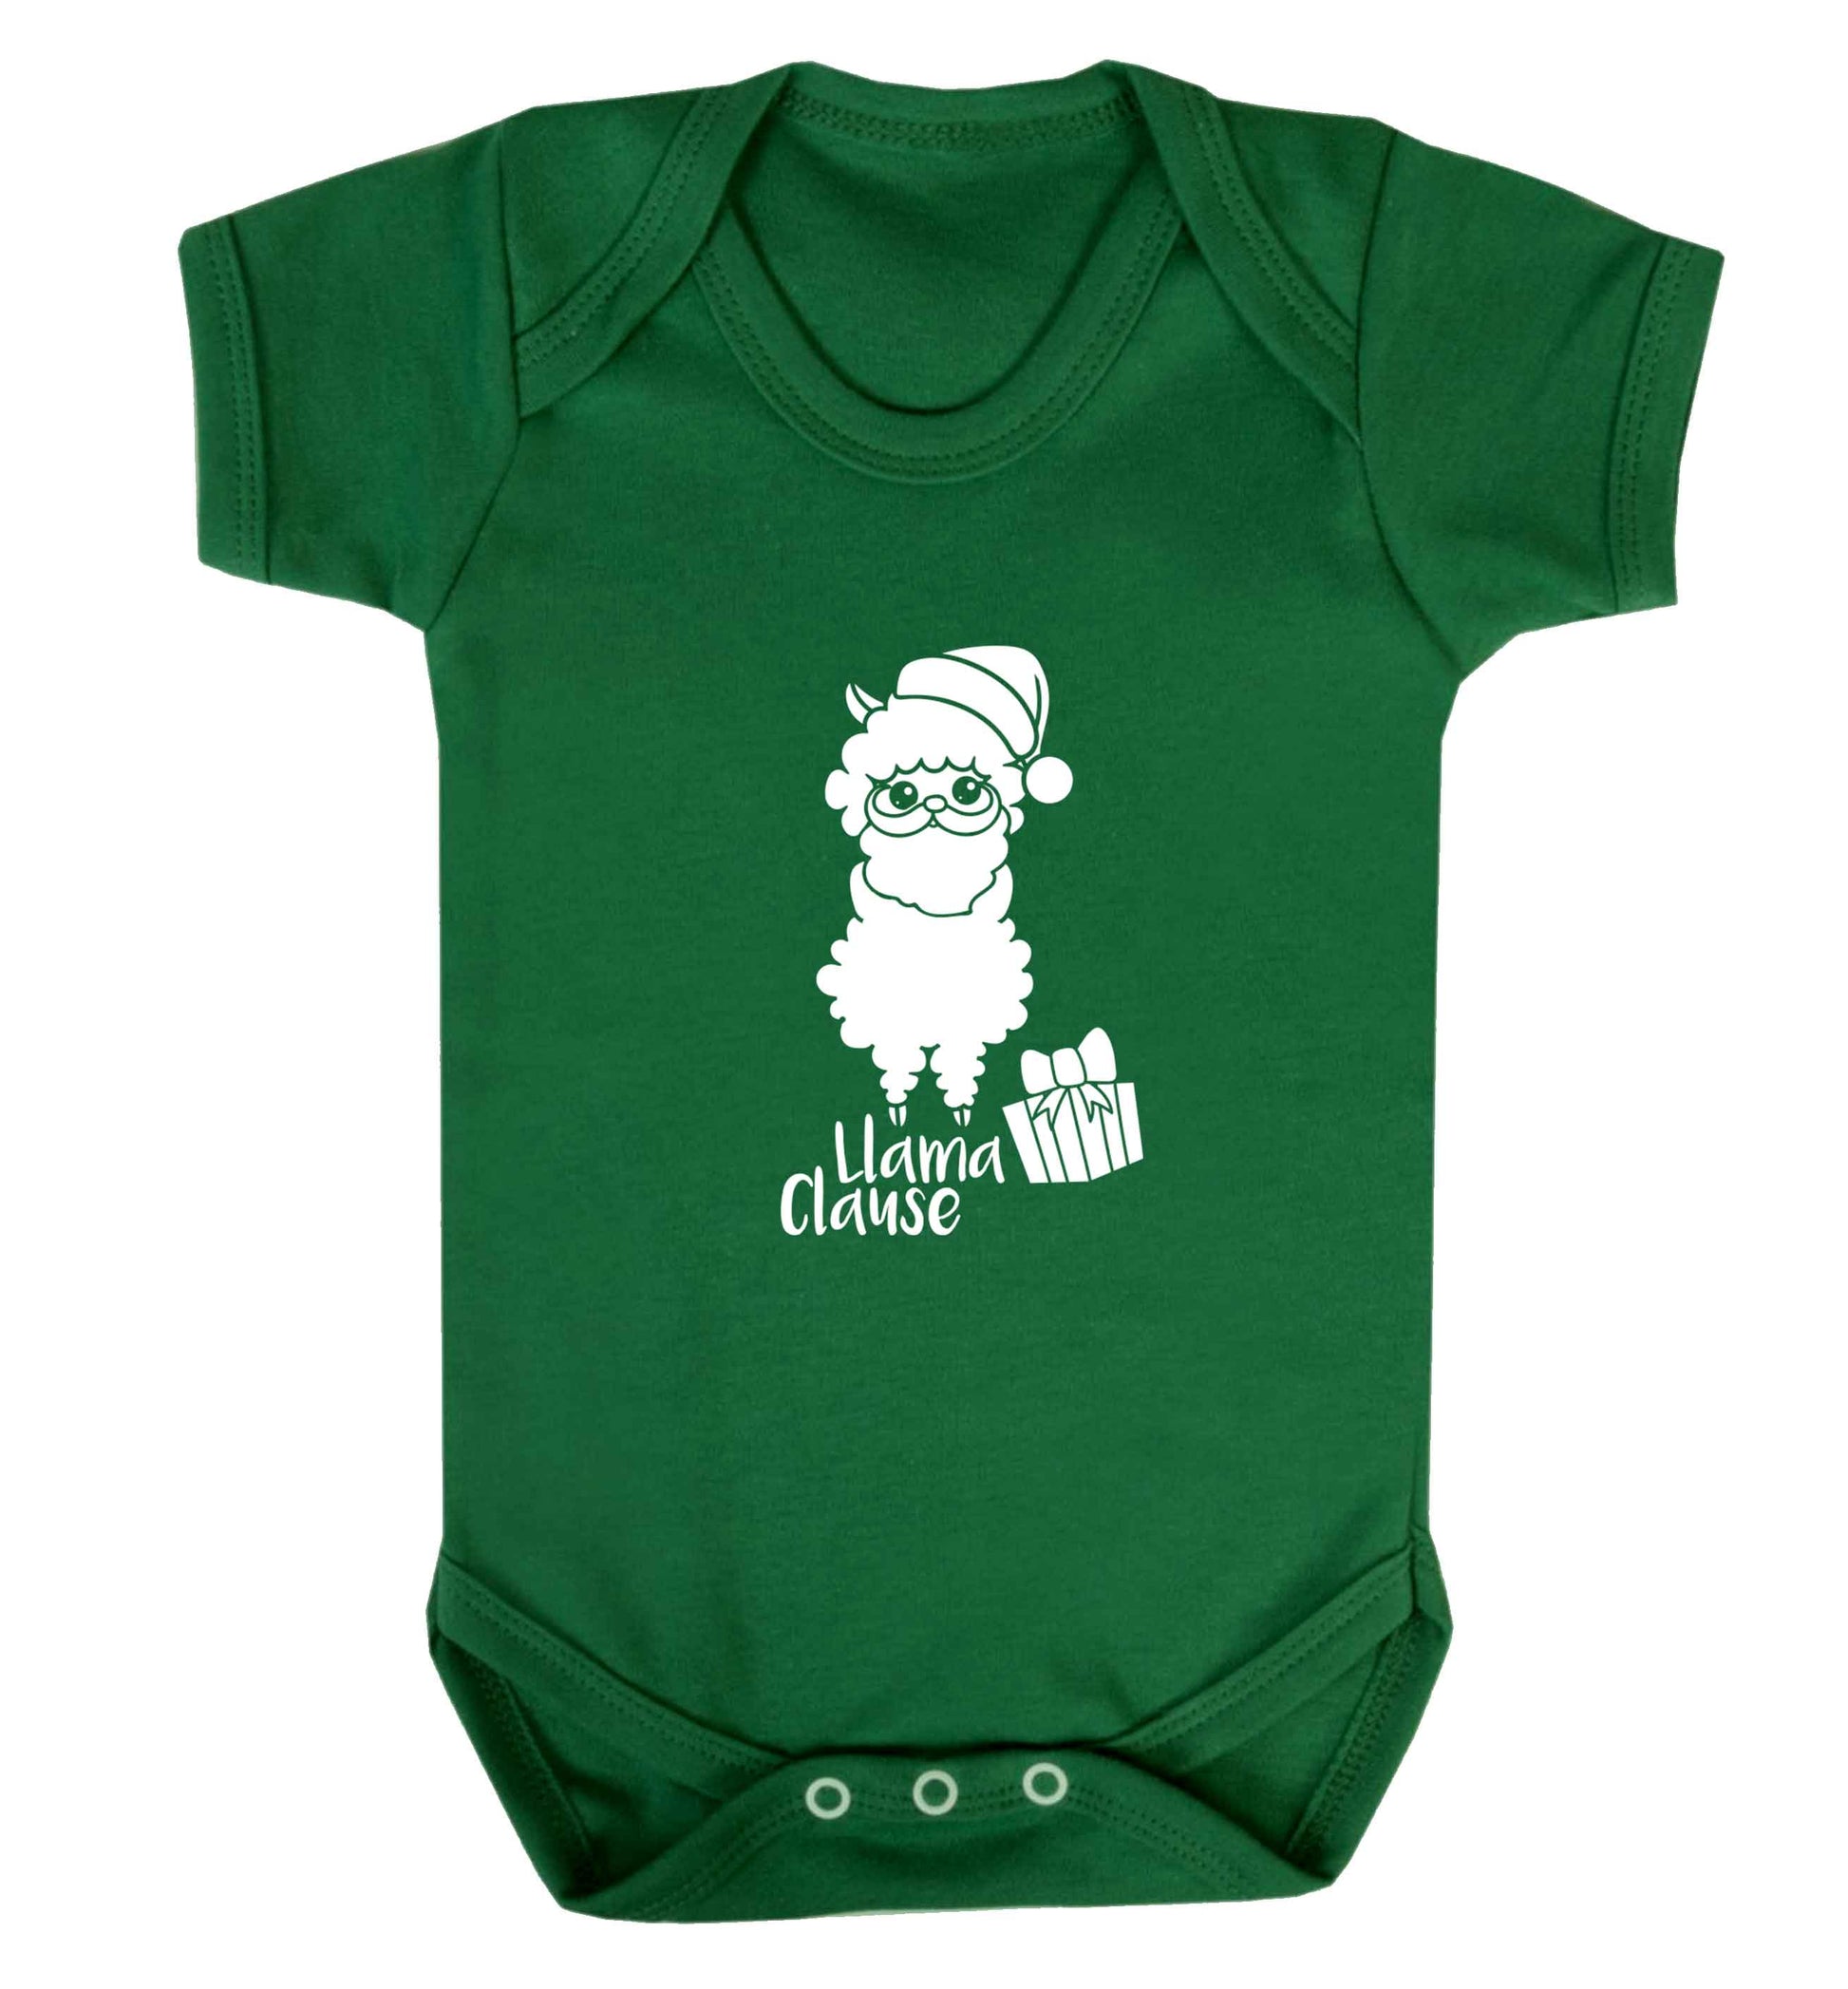 Llama Clause baby vest green 18-24 months